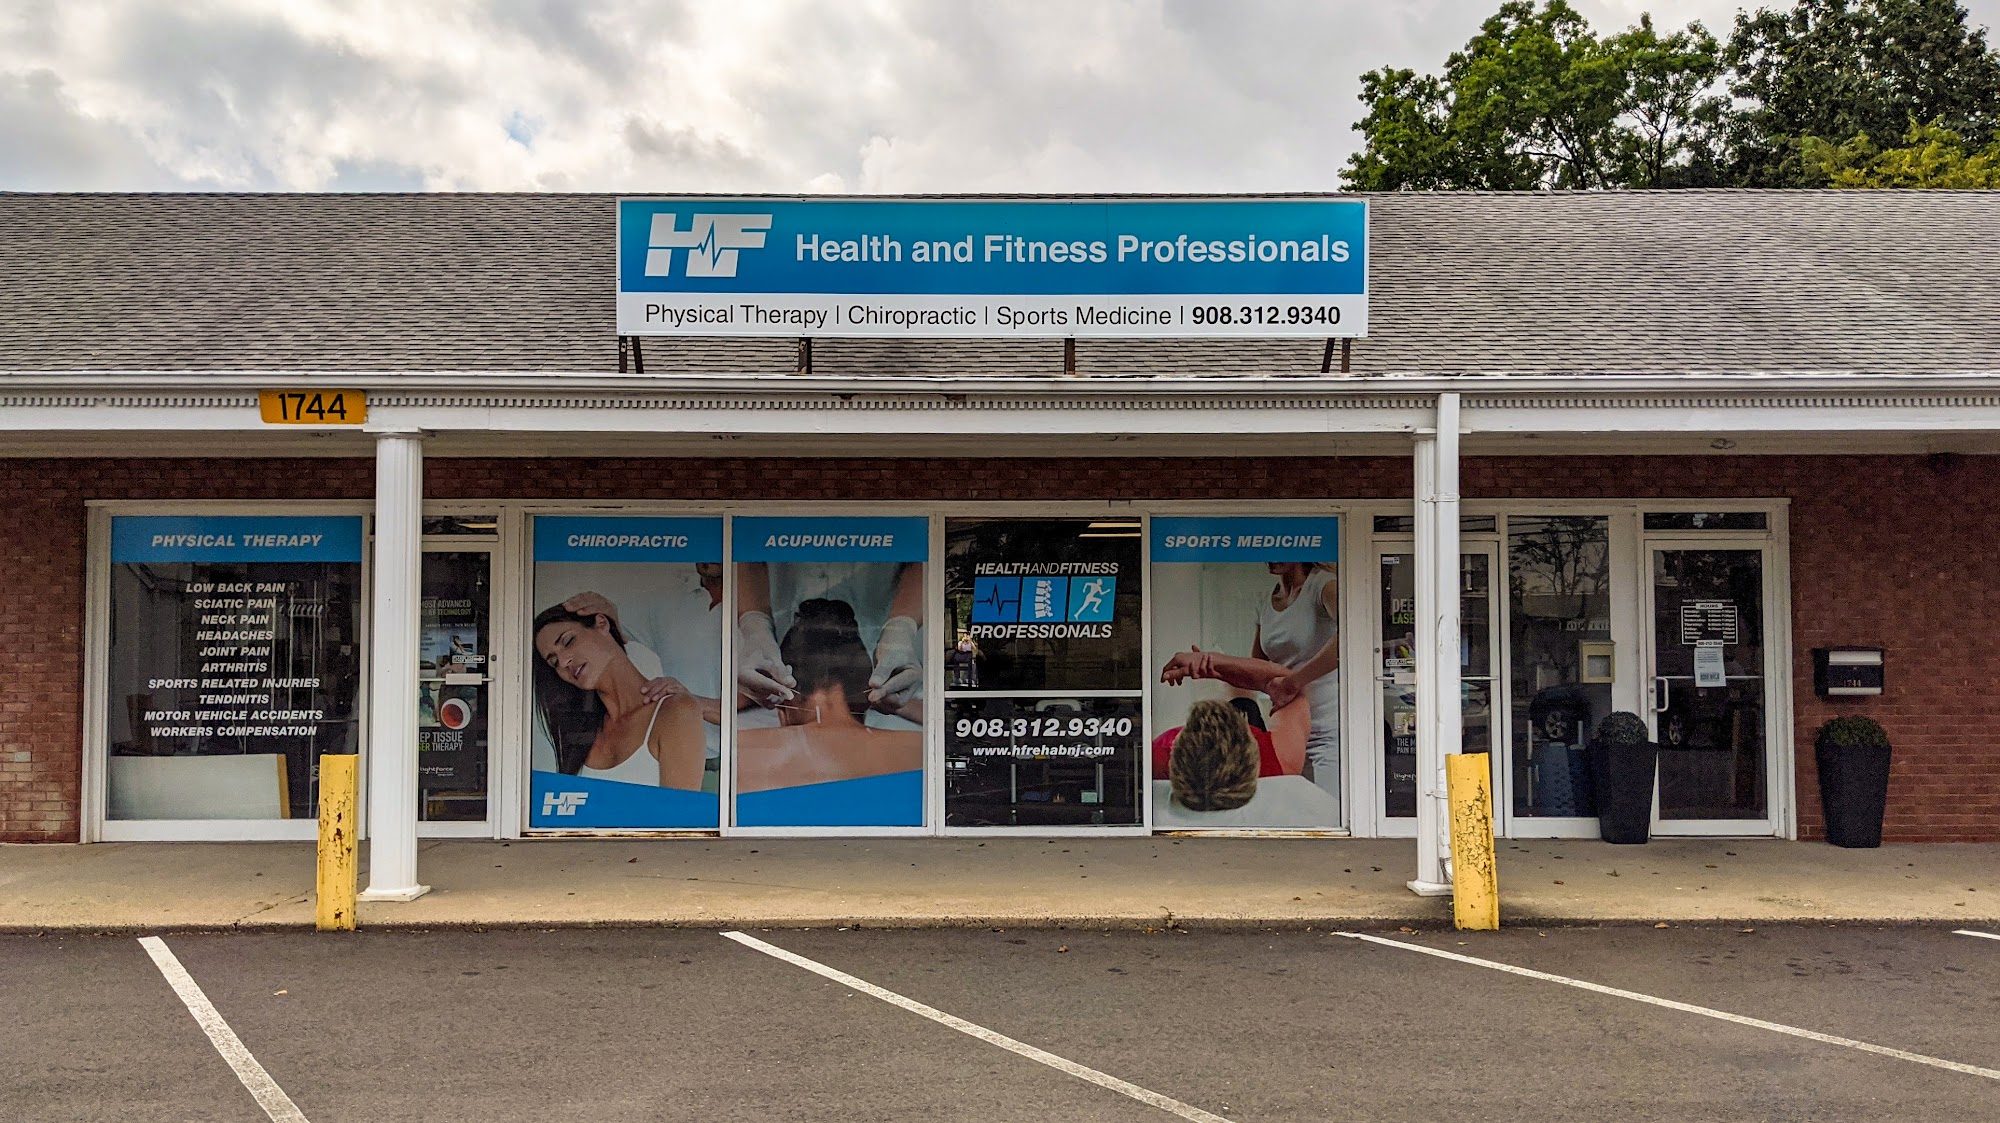 Health and Fitness Professionals